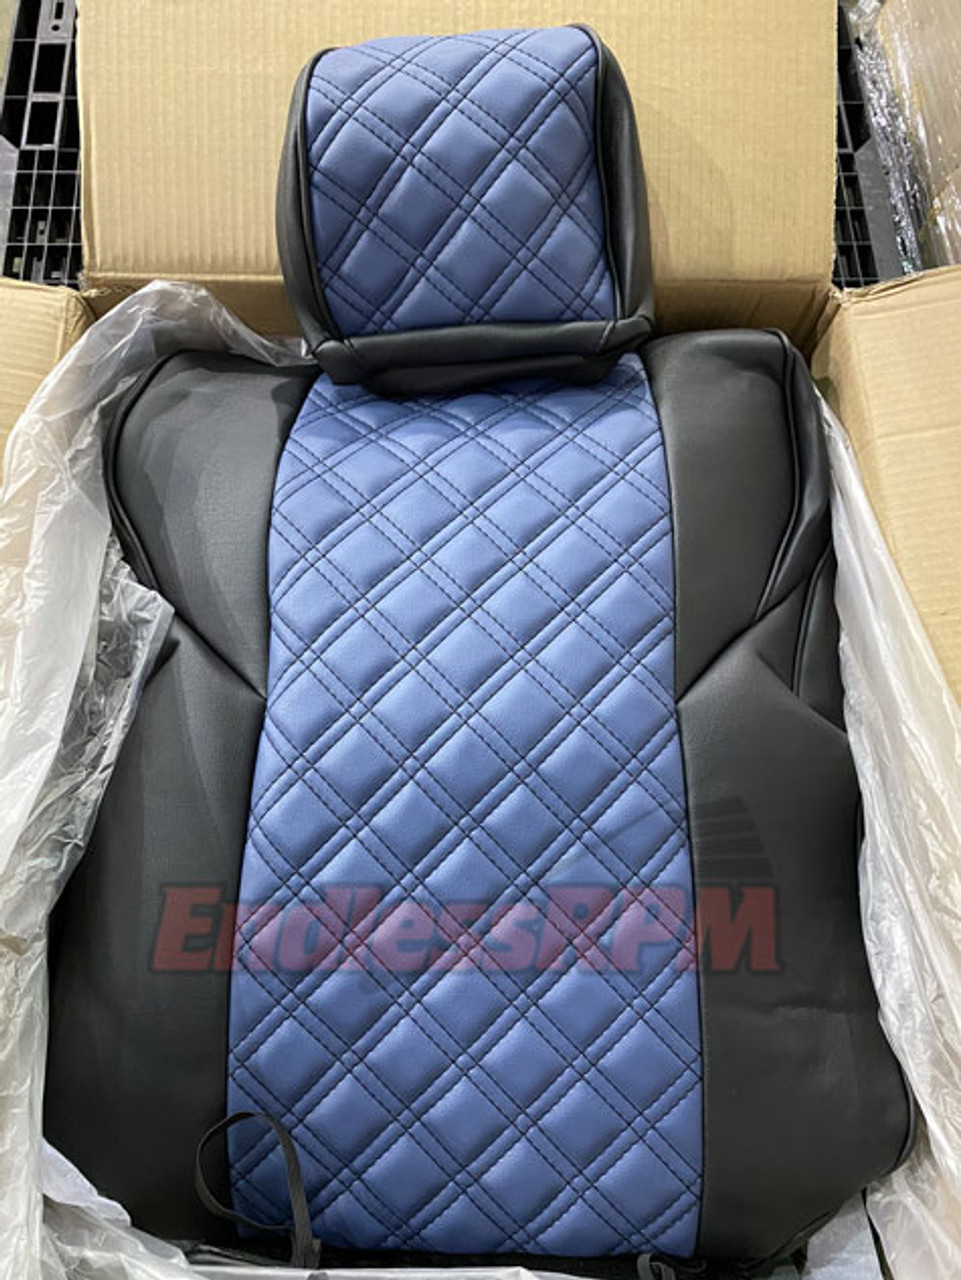 Acura TSX Diamond Pattern Seat Cover Skins- Custom color 2004-2008 CL9 